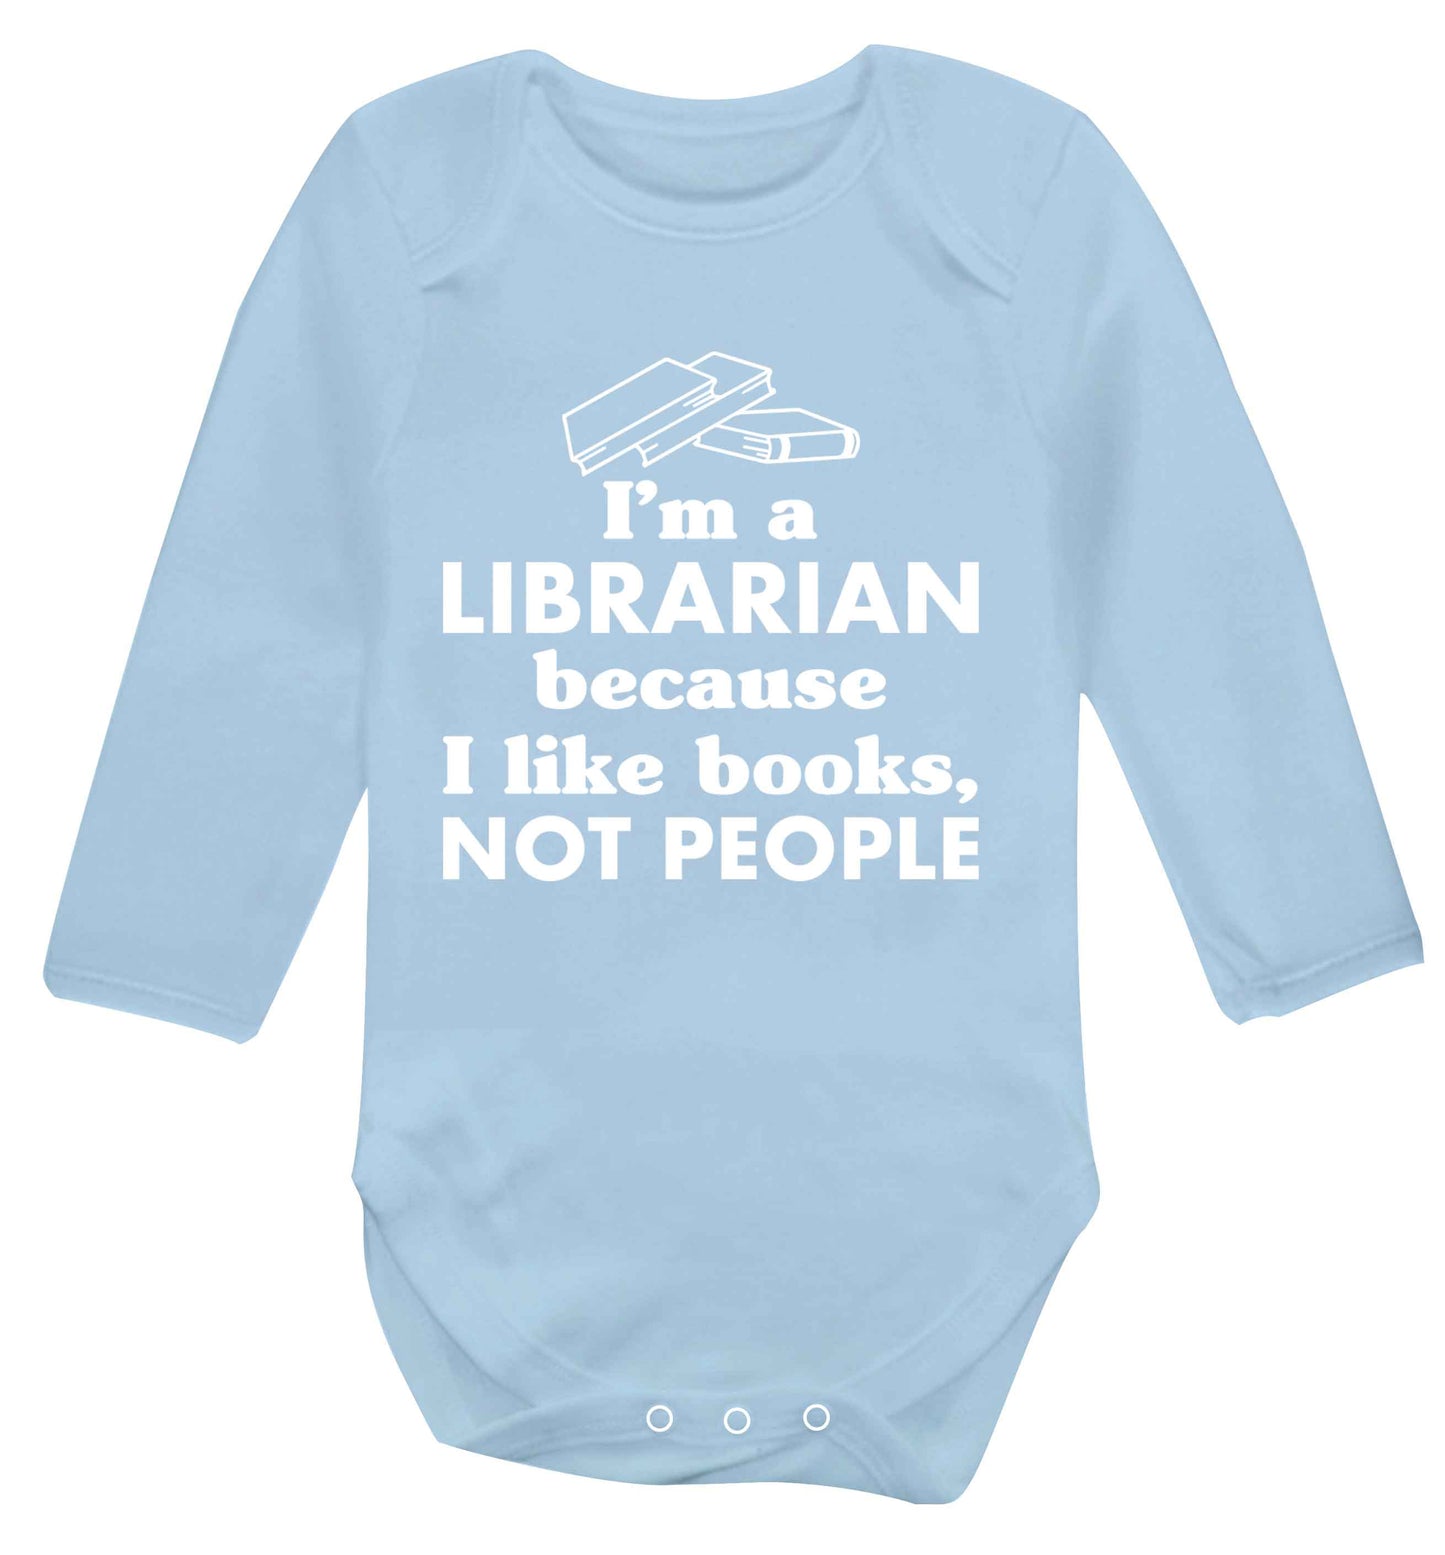 I'm a librarian because I like books not people Baby Vest long sleeved pale blue 6-12 months